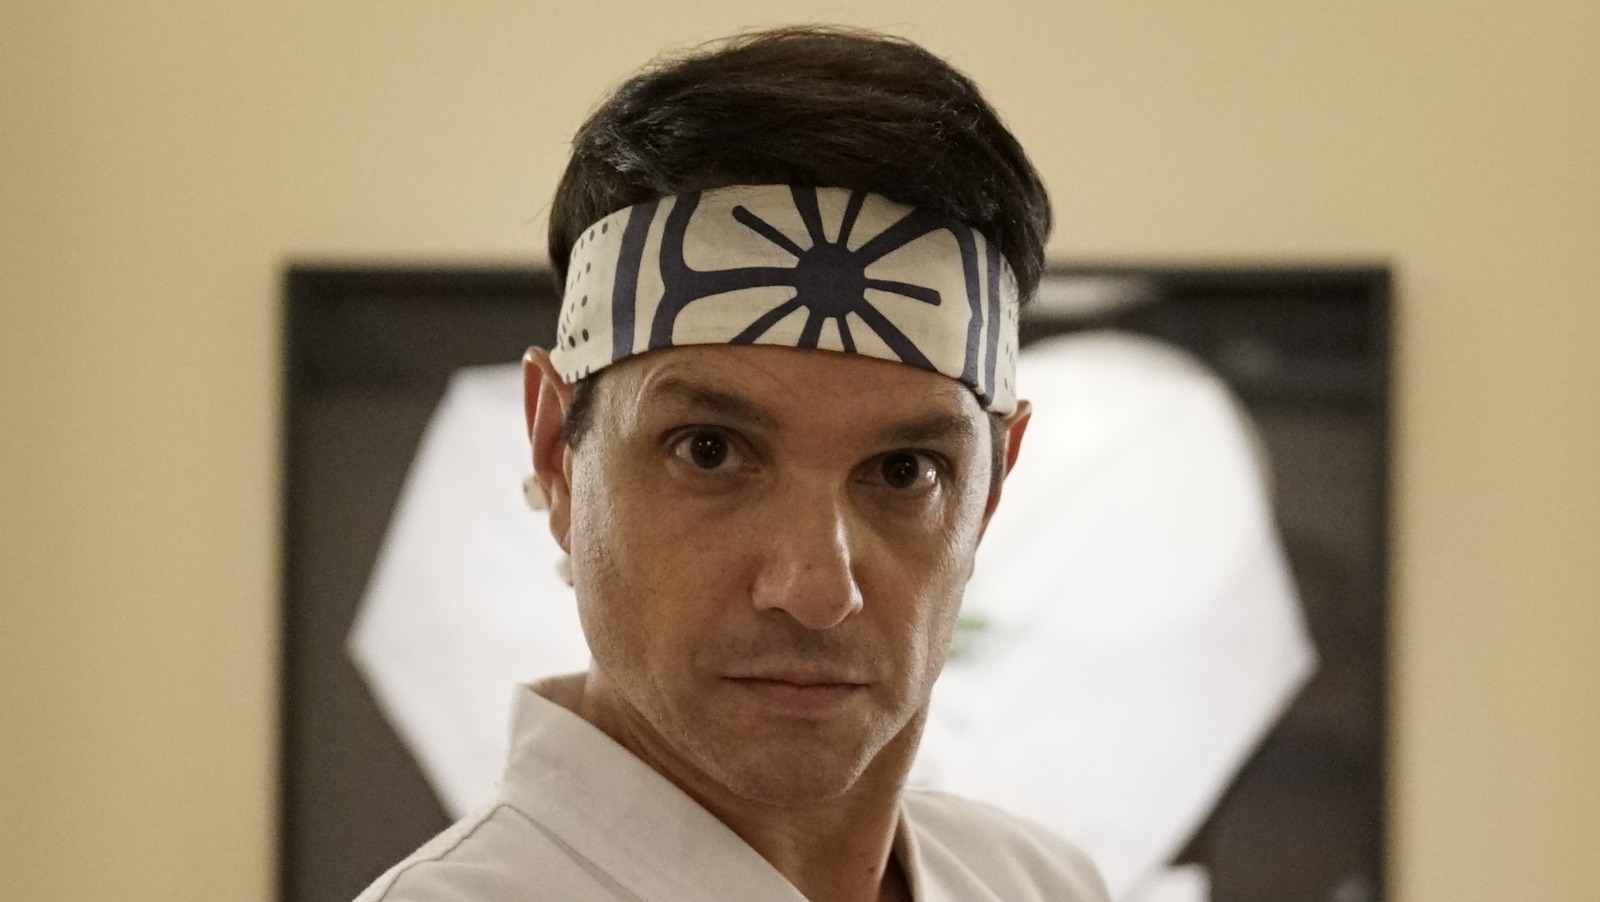 Cobra Kai: Why Did Netflix Pick Up The Show From ?